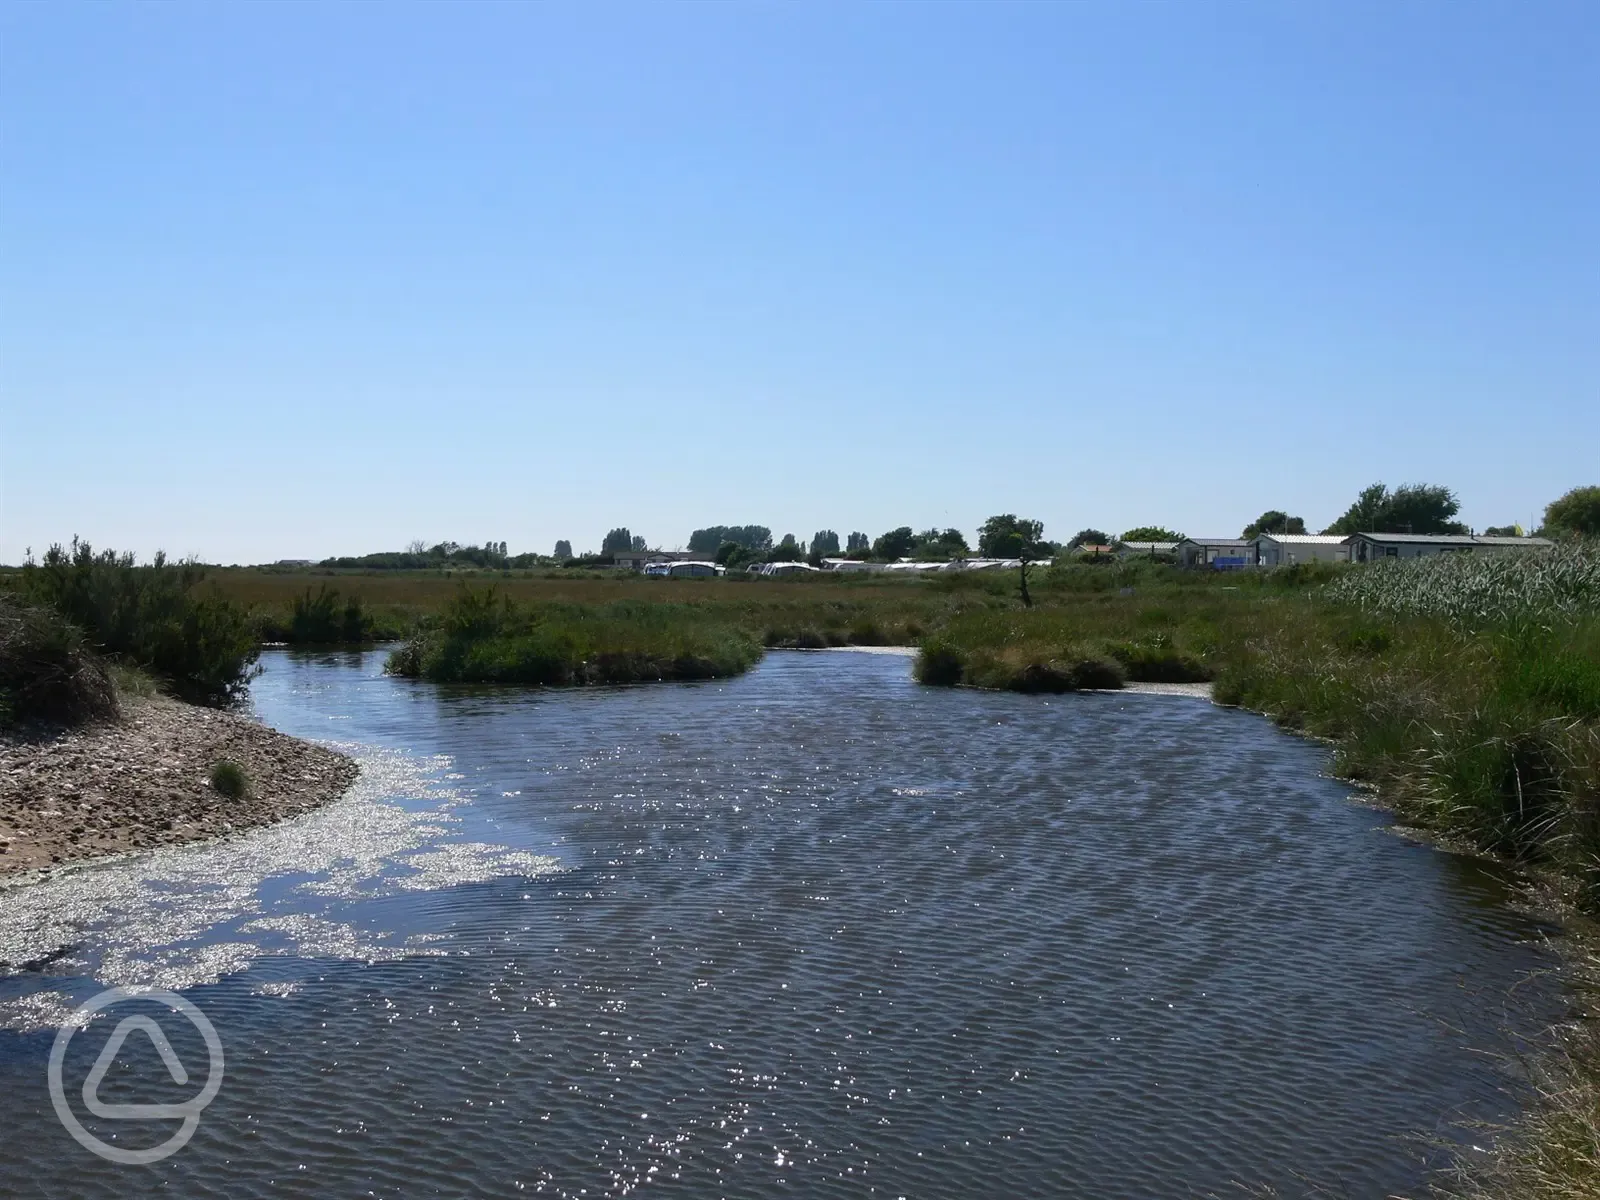 The kids will love the nearby creeks for paddling and crabbing.